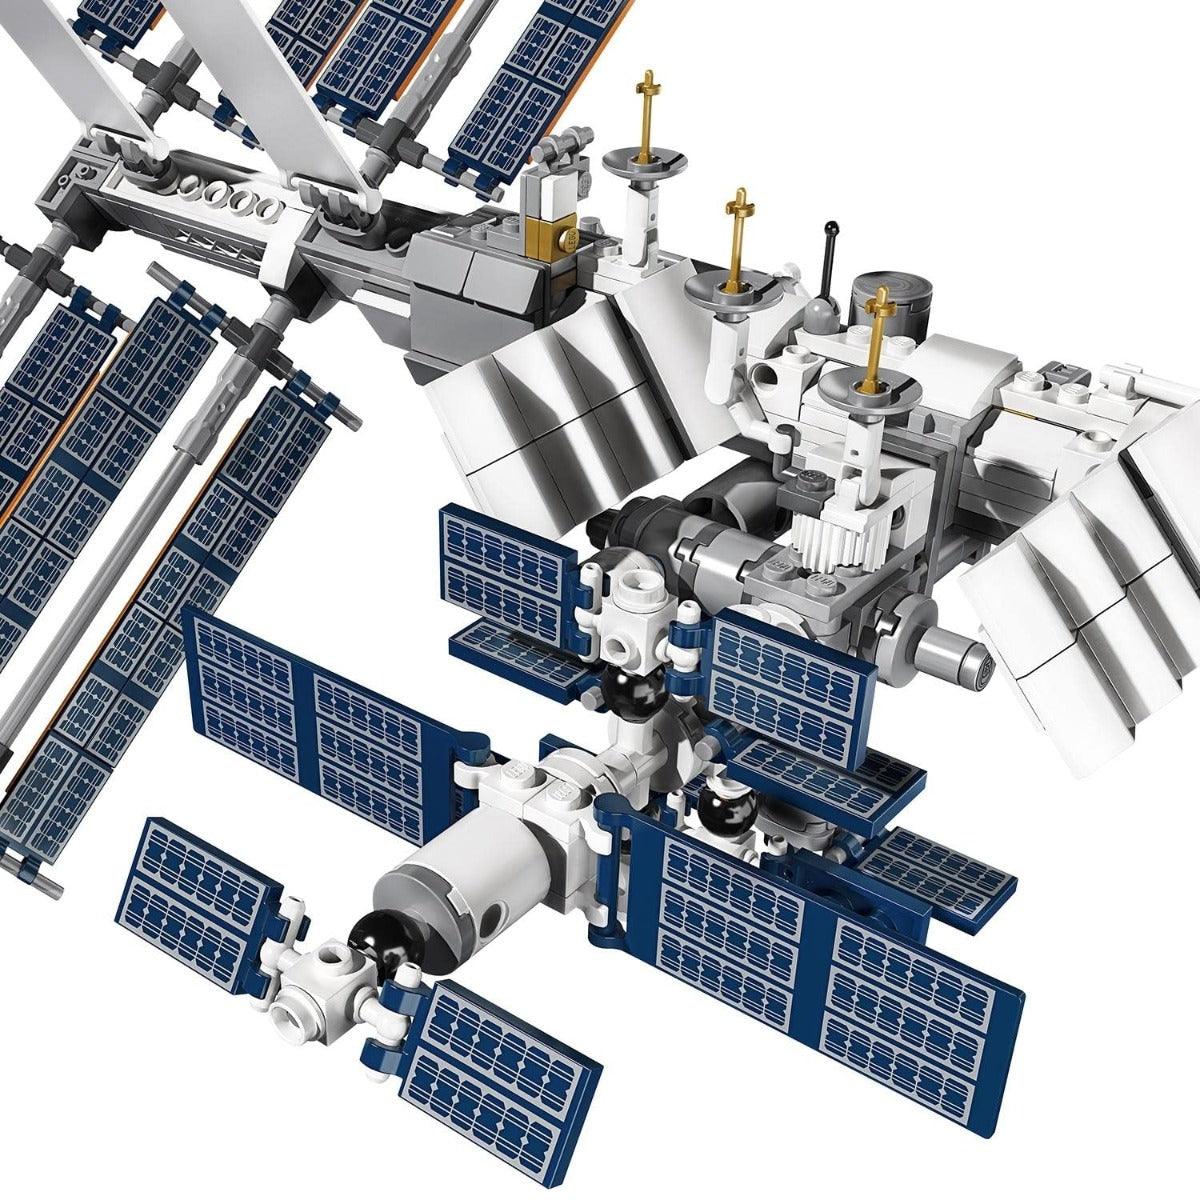 Lego Ideas International Space Station Building Kit For Ages 16+